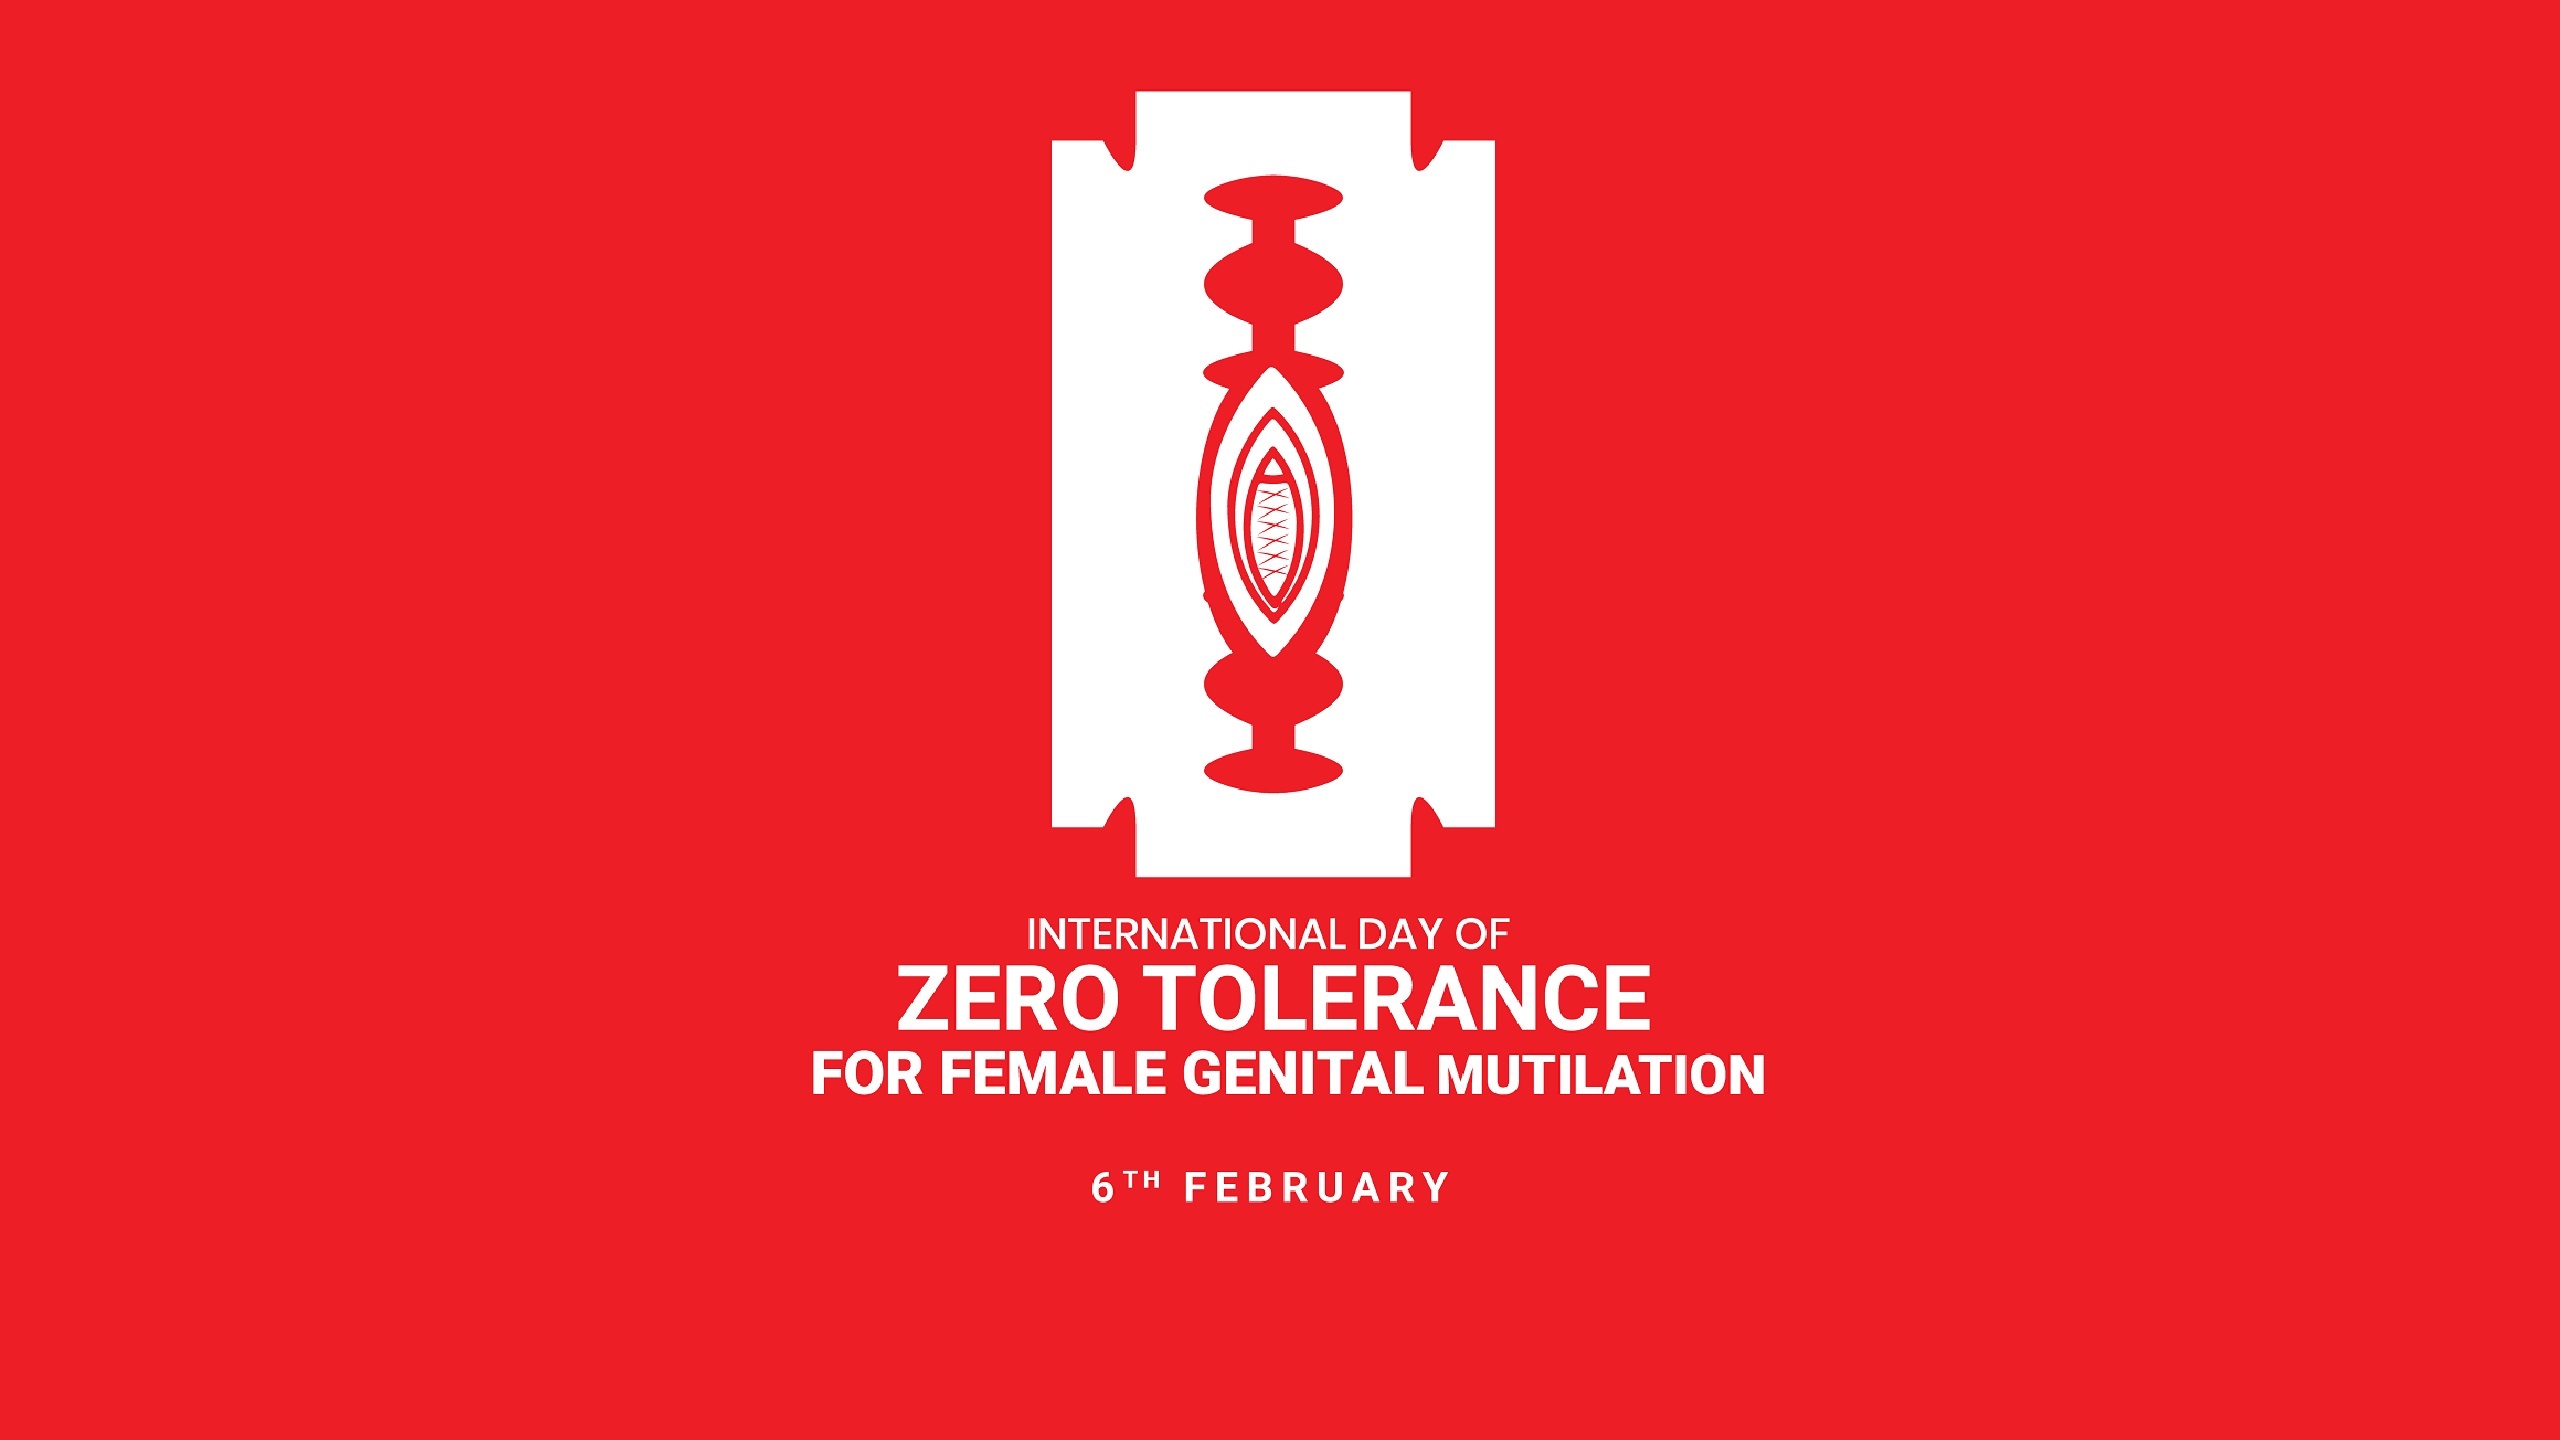 ‘Her Voice, Her Future’: UN Highlights Fight Against Female Genital Mutilation